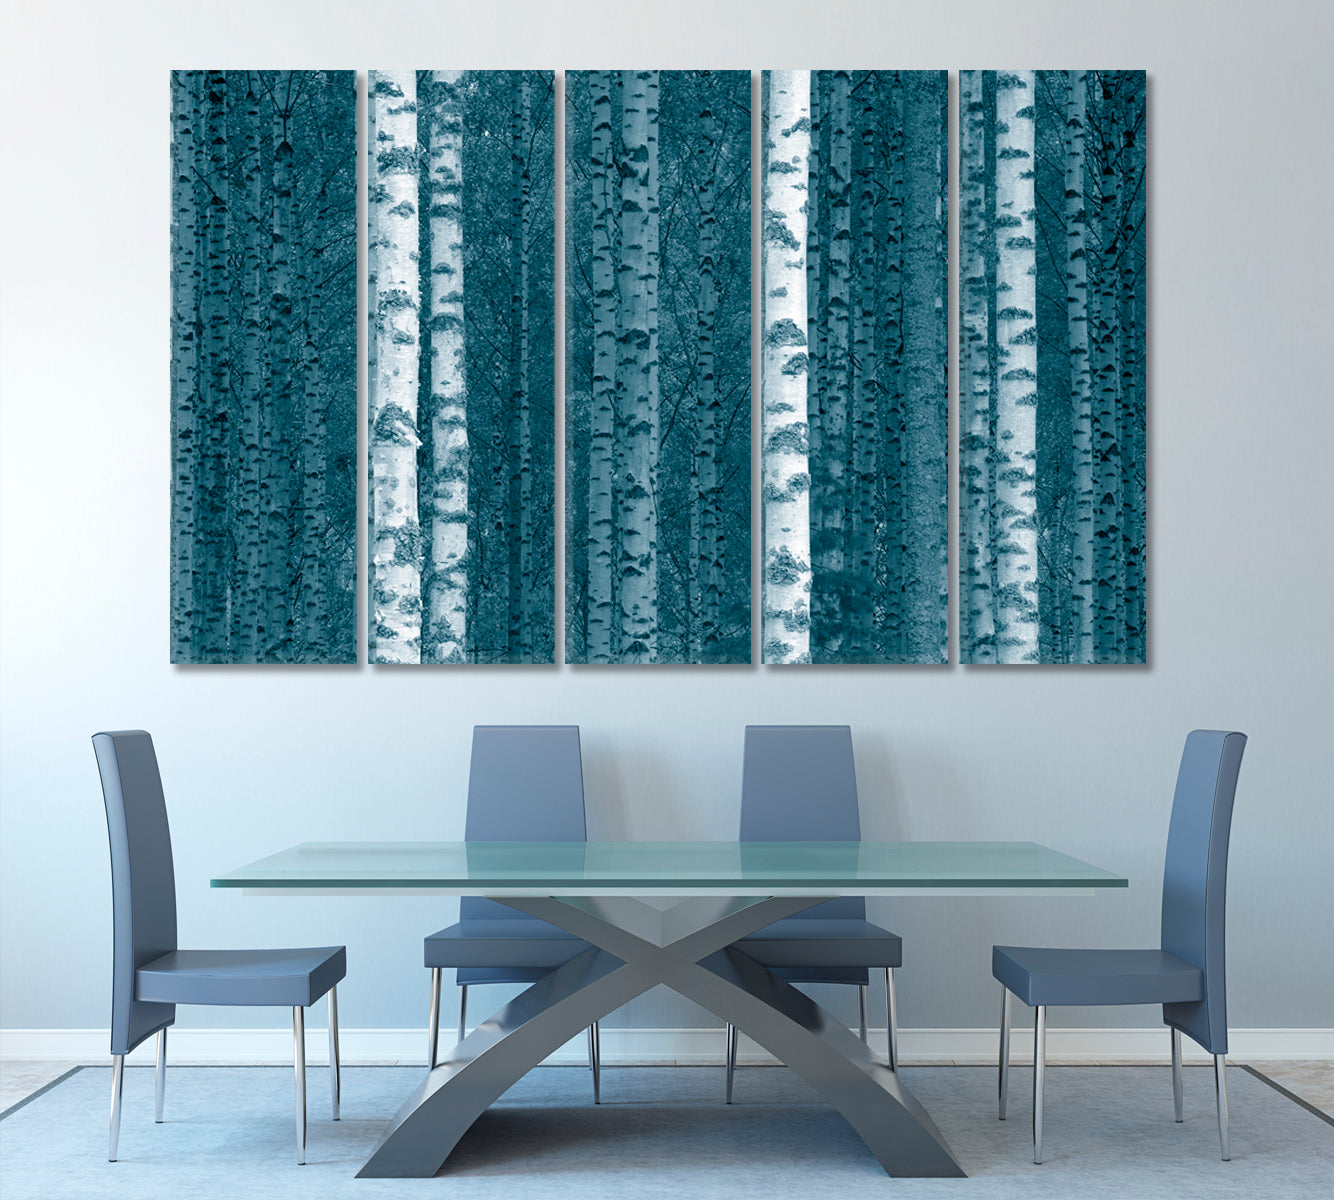 Birch Tree Trunks in Finnish Forest Nature Wall Canvas Print Artesty 5 panels 36" x 24" 